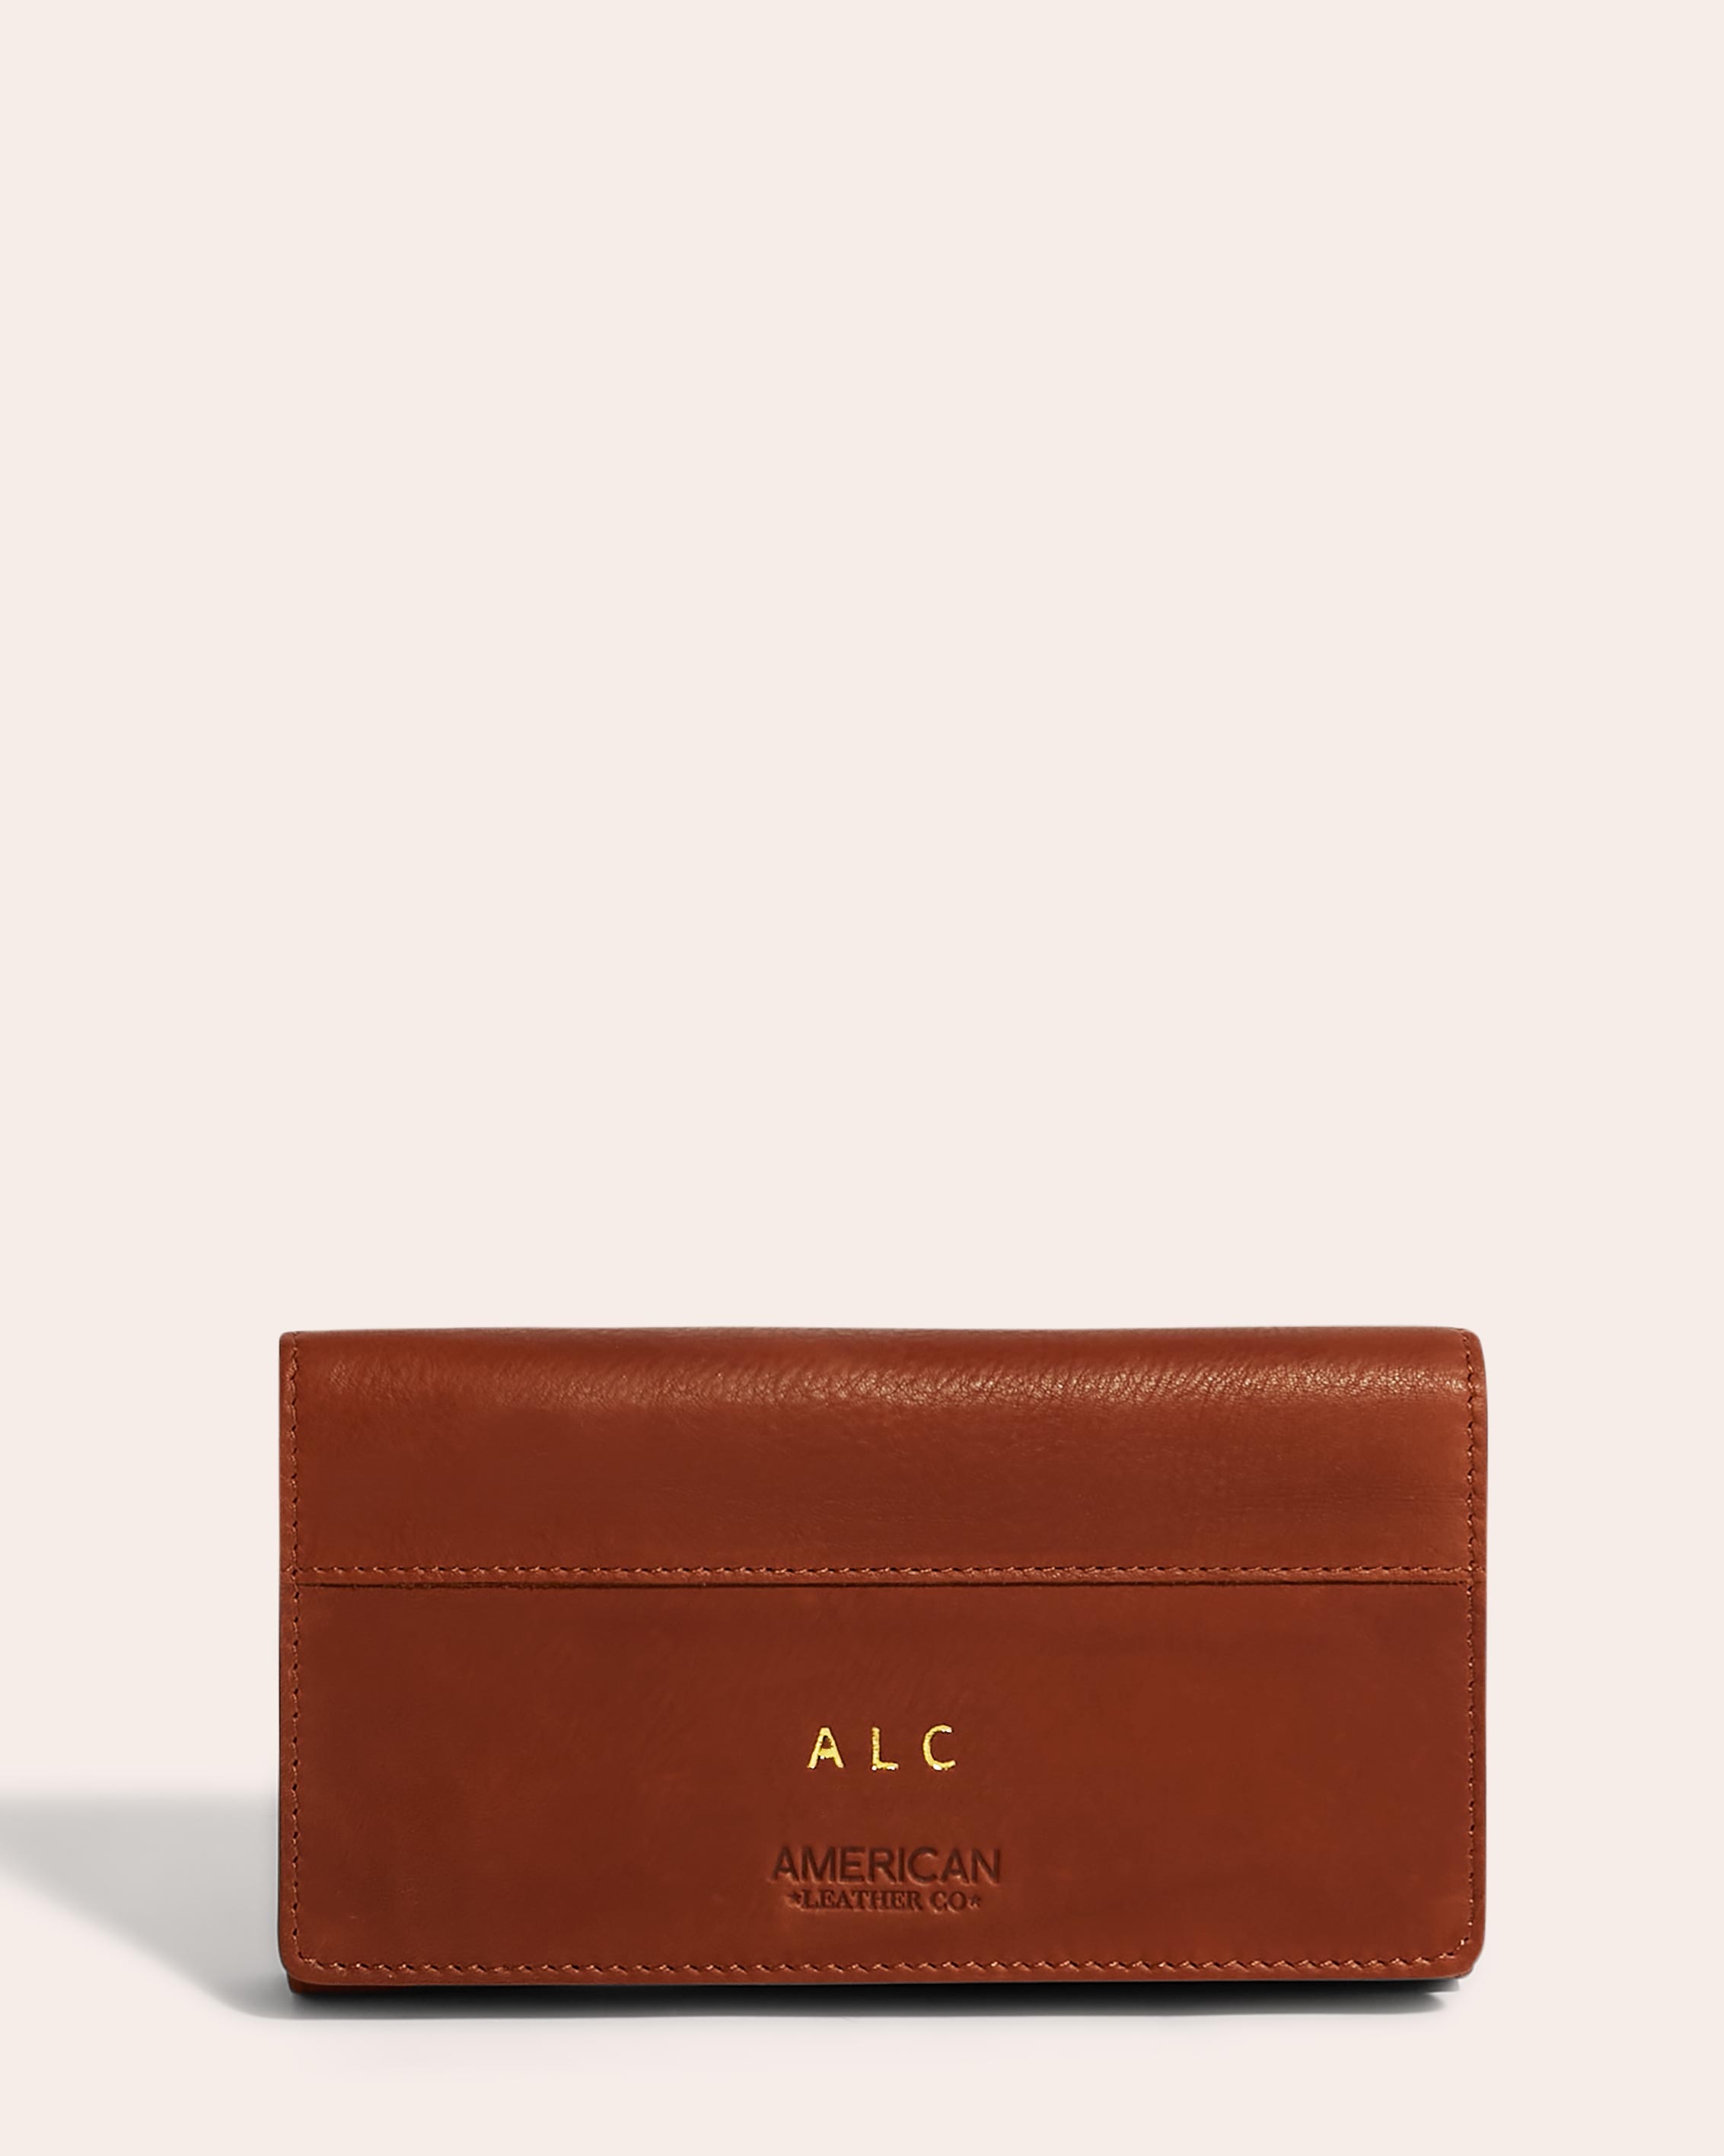 American Leather Co. Clyde Wallet Butter Rum